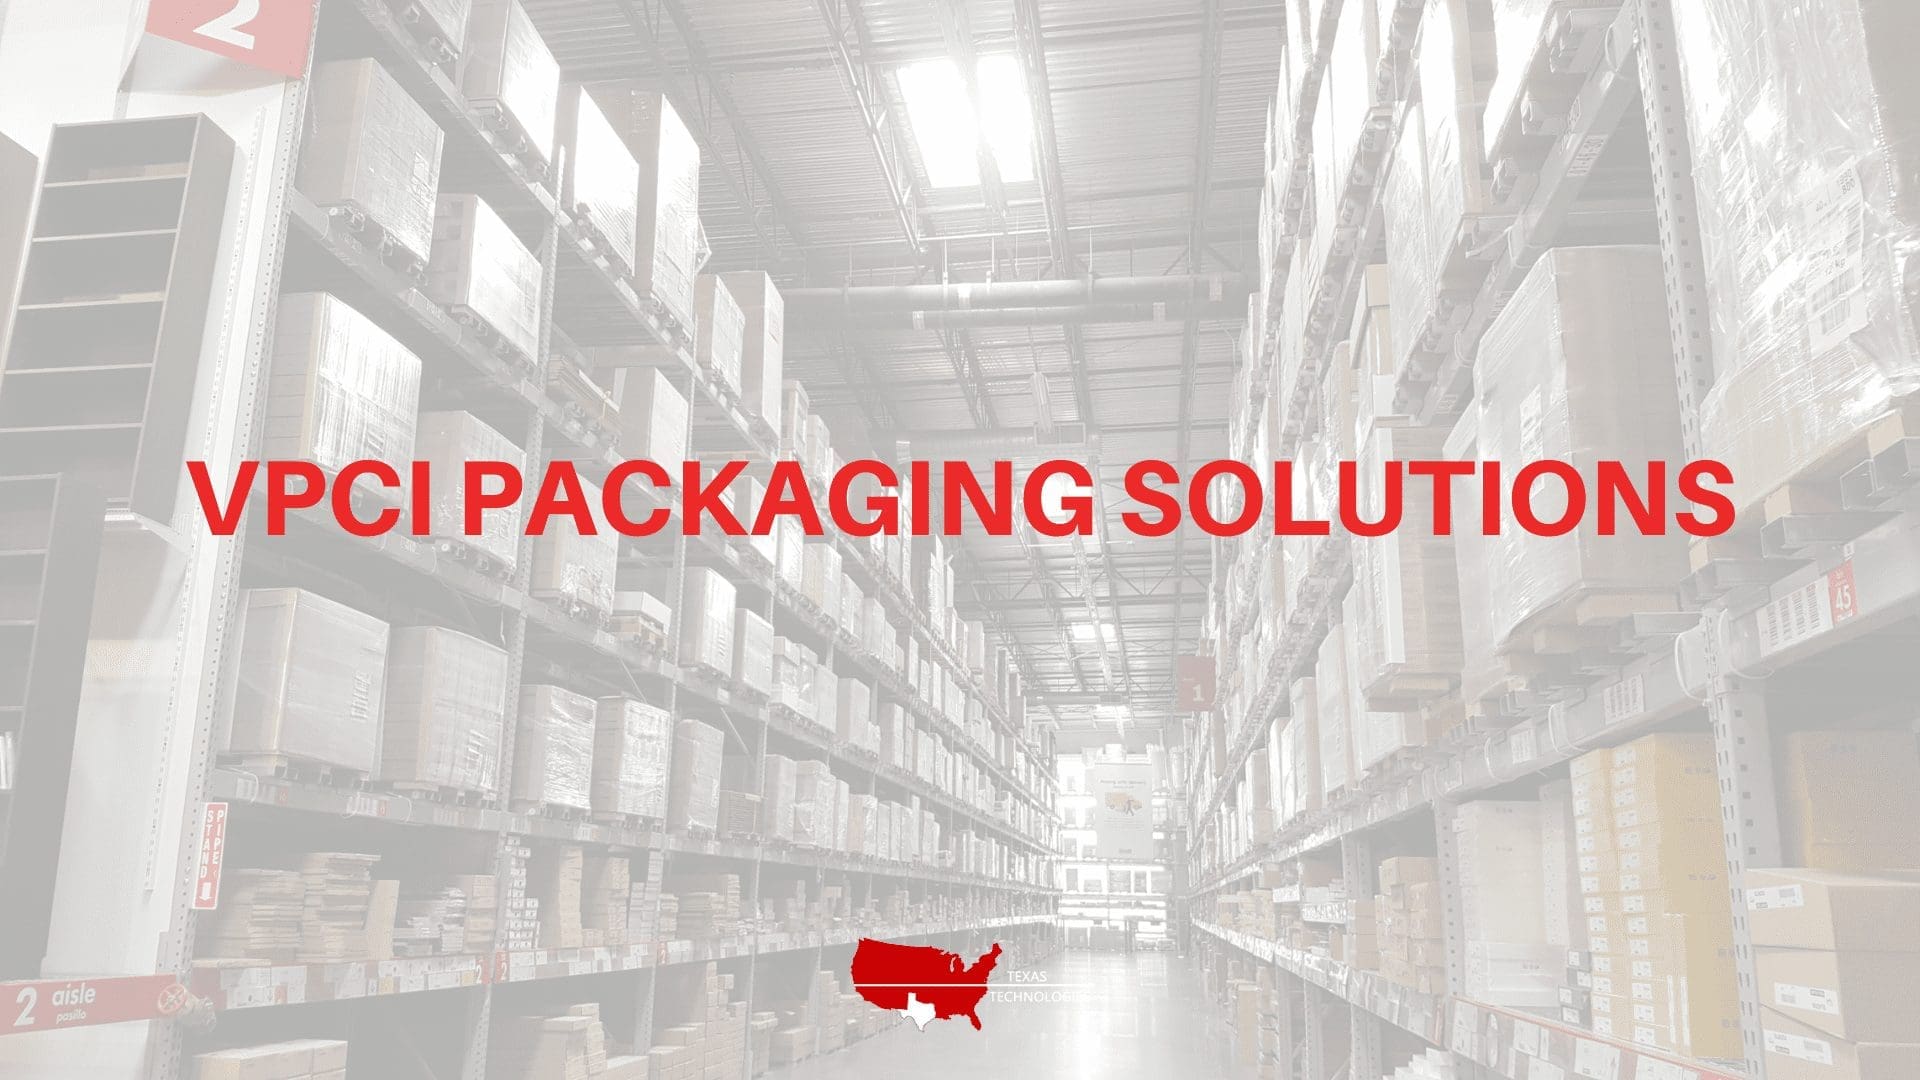 VpCI Packaging Solutions